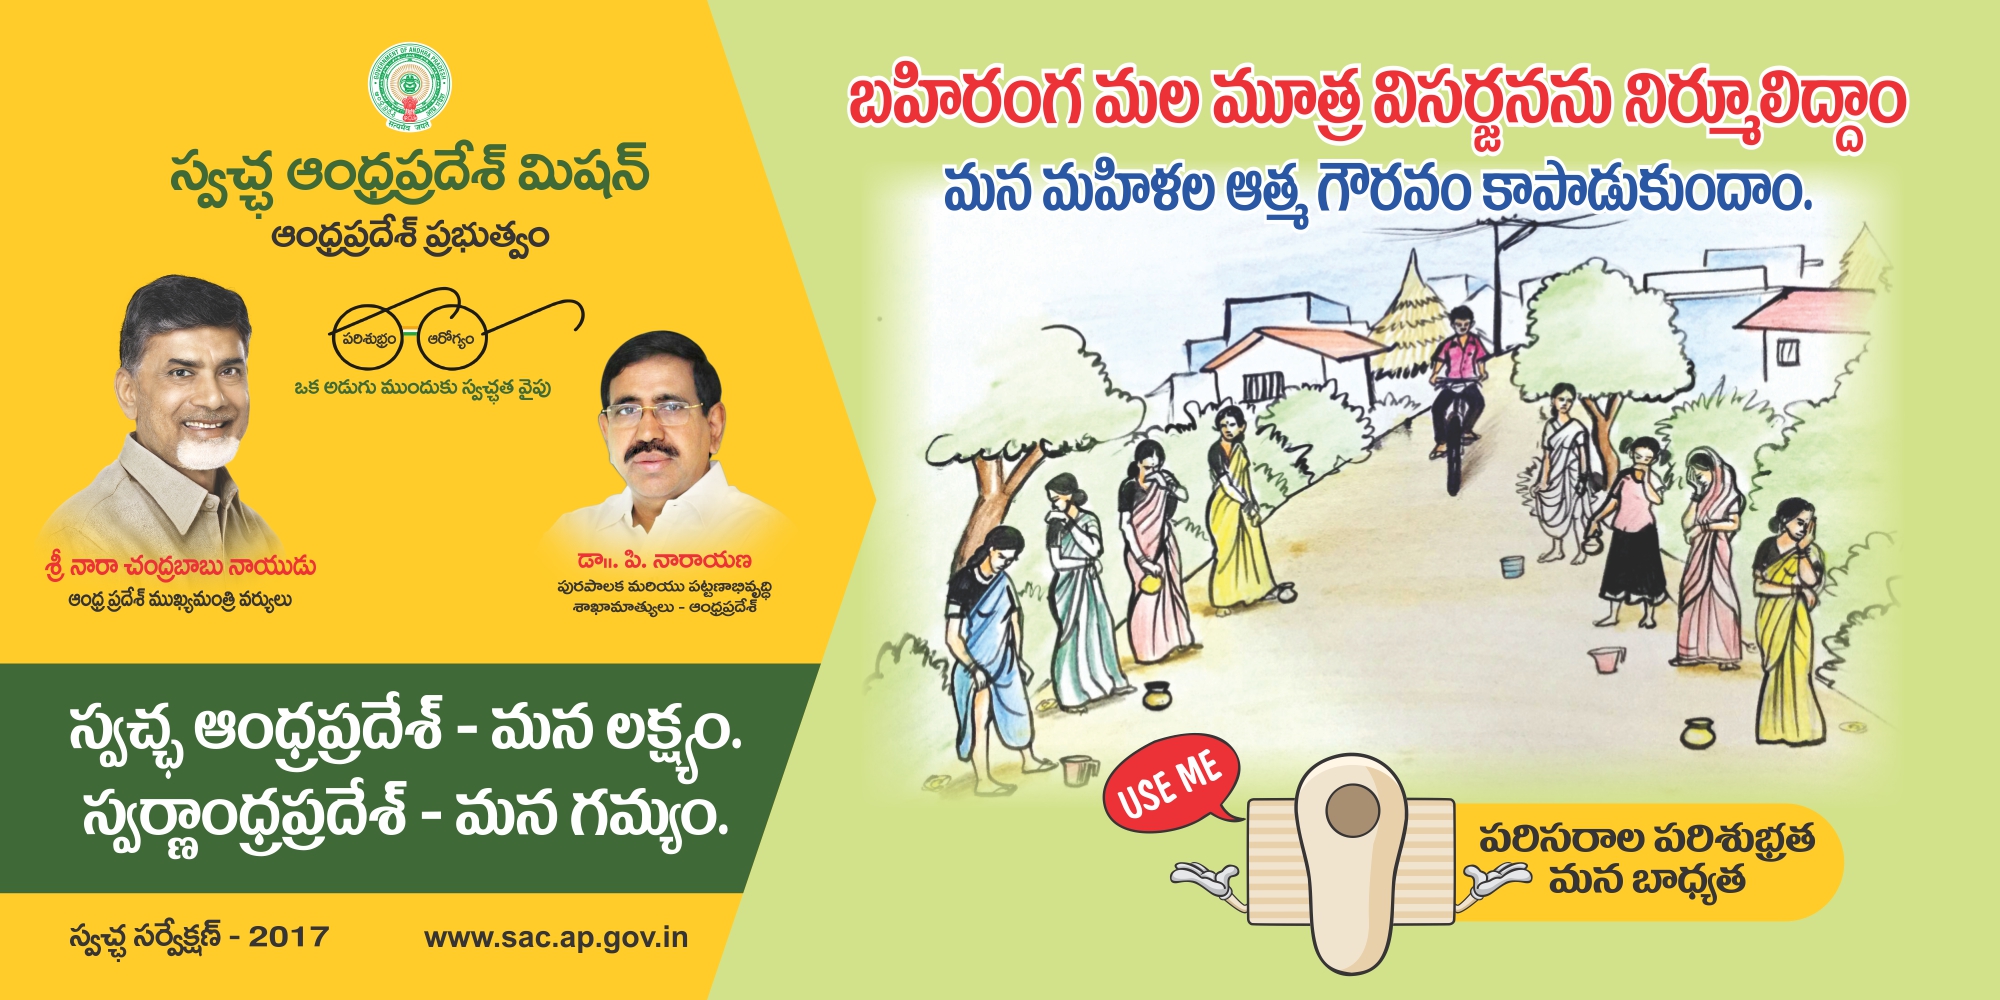 New Swachch campiagn in AP